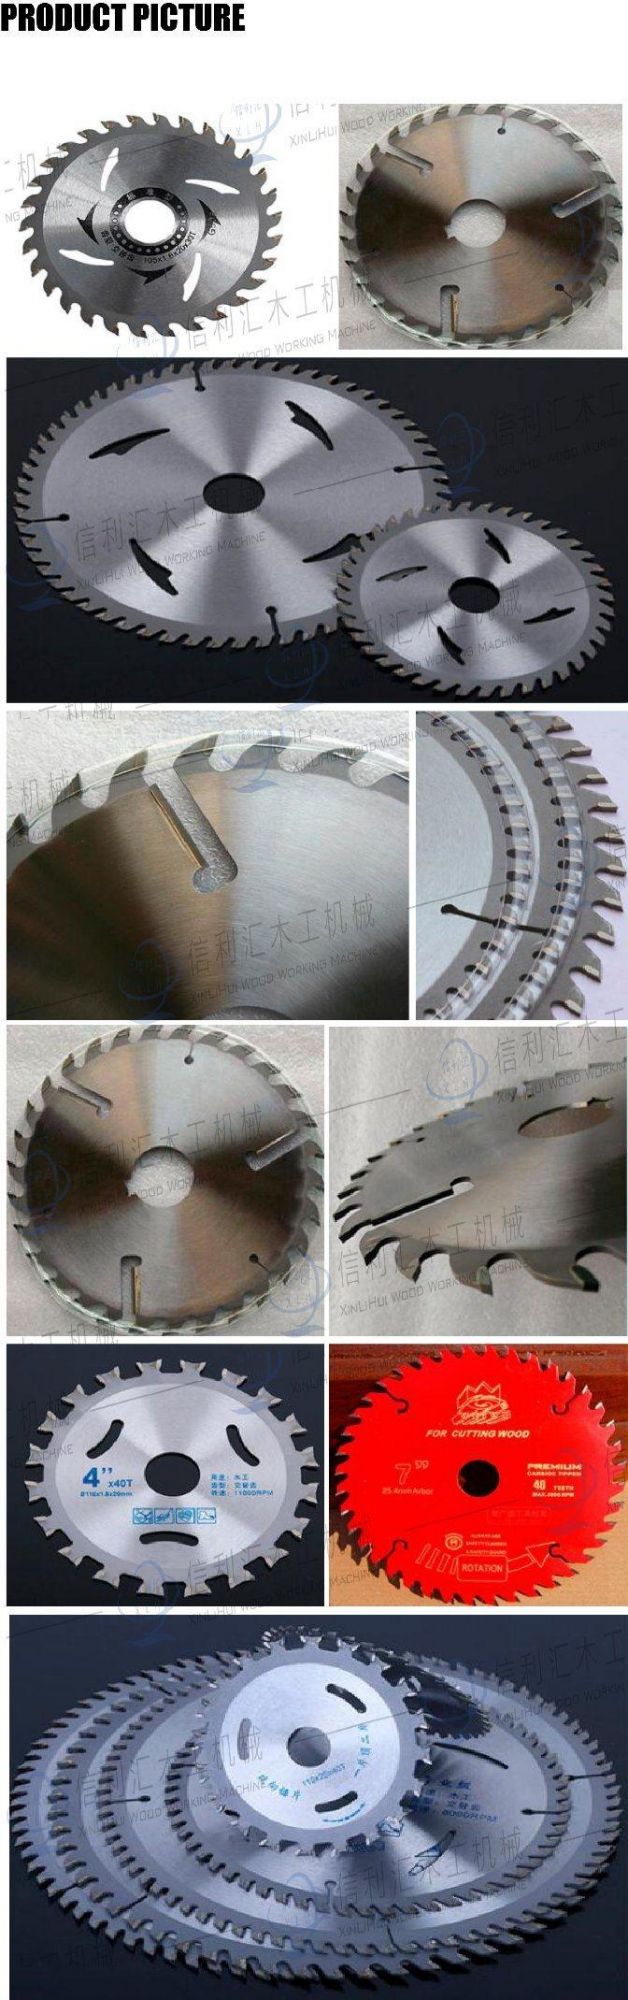 Planer Blade, HSS Saw Blade, Tct Saw Blade, Woodworking Tool, Diamond Tools, Machinaries, Building Material, Home Appliances, Carpinters Tools,